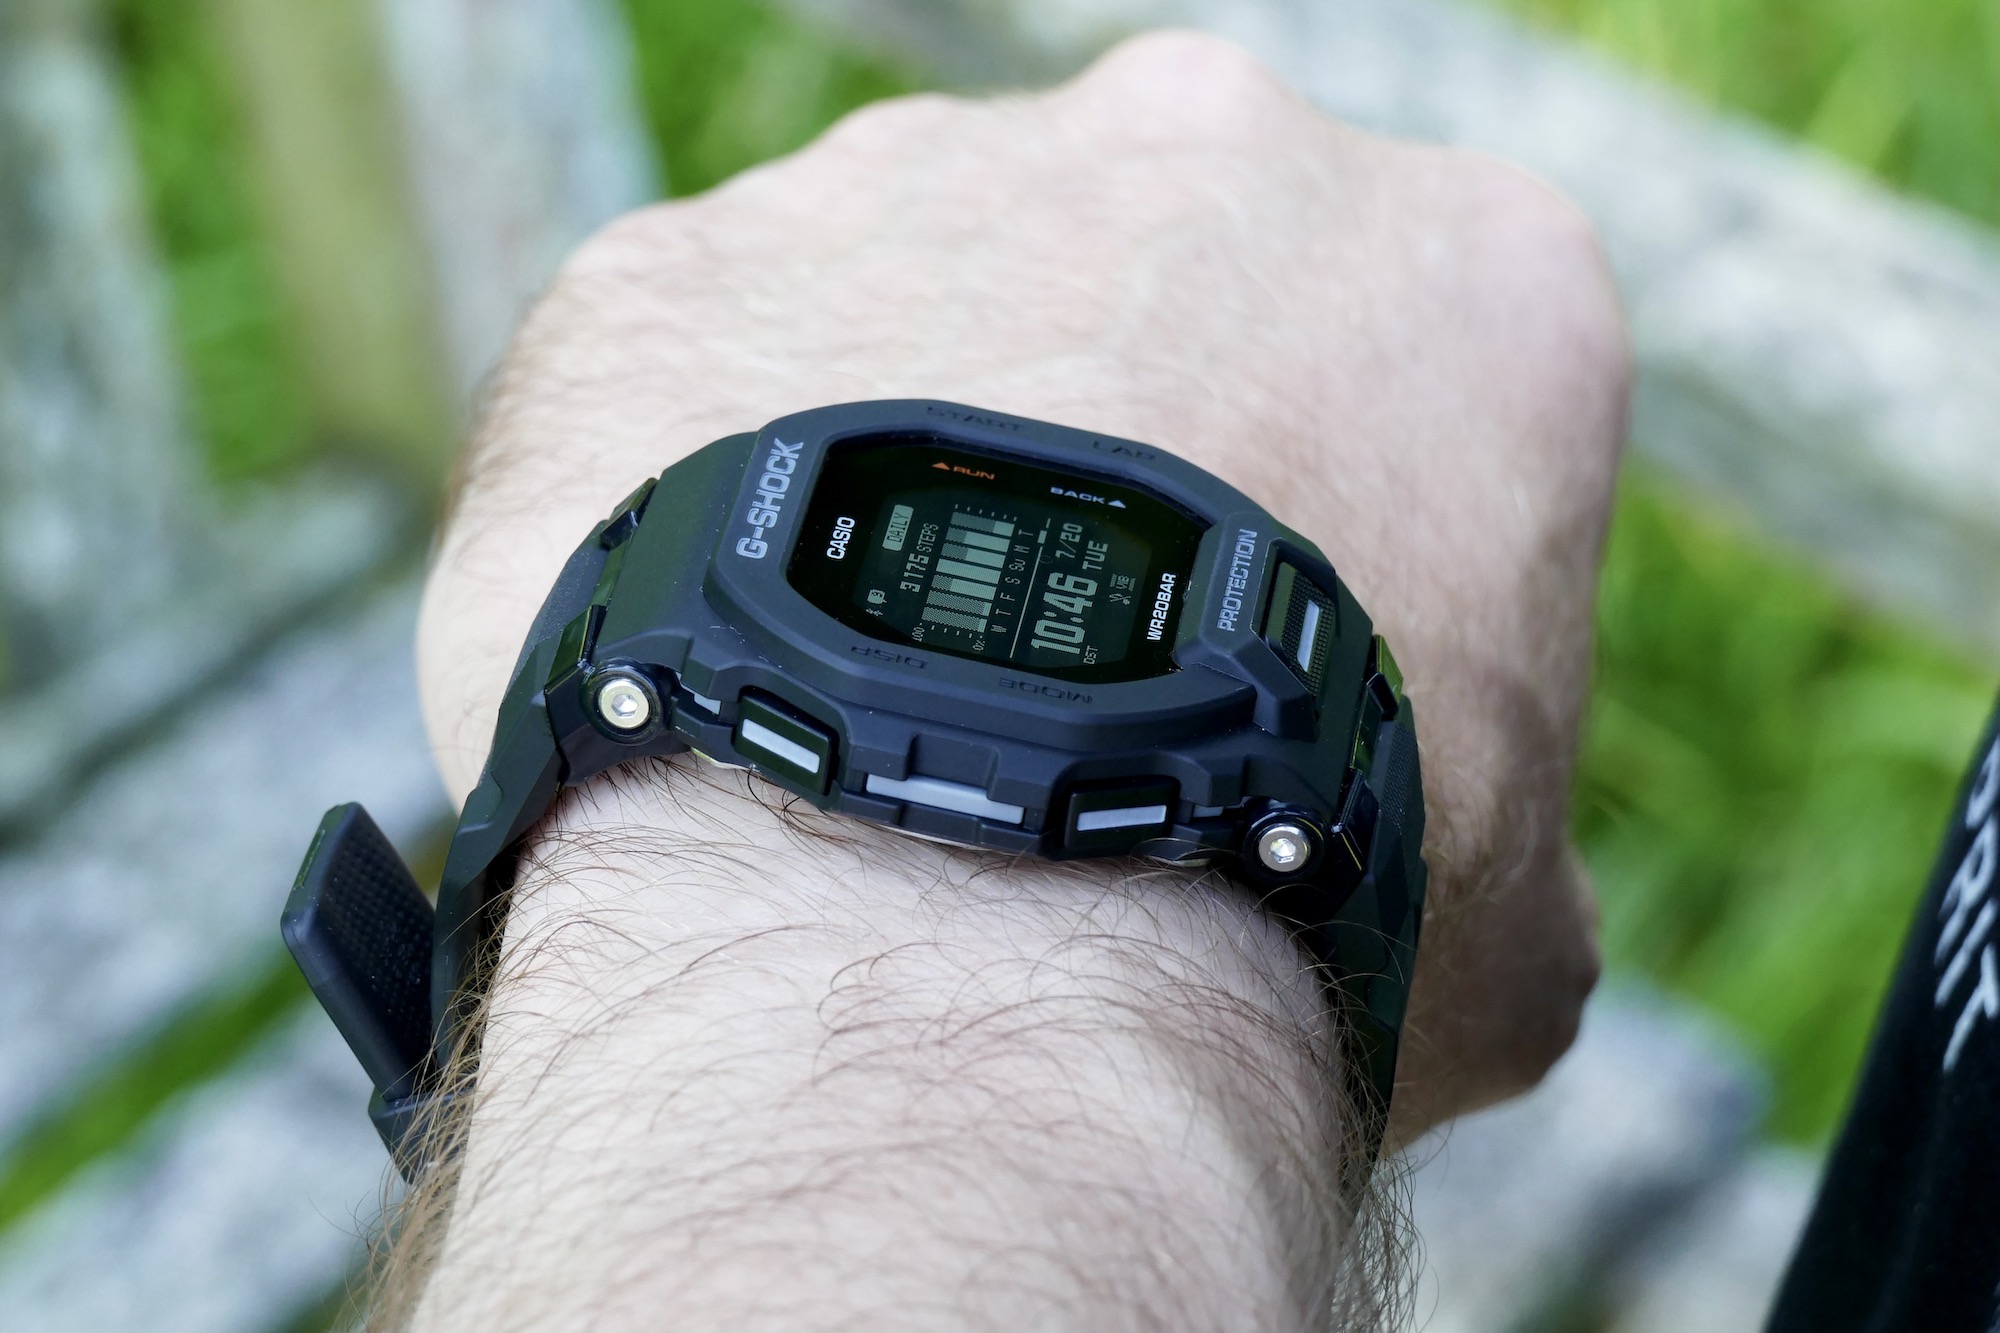 Review: G-Shock Casio Digital | Balanced Perfectly GBD-200 Trends